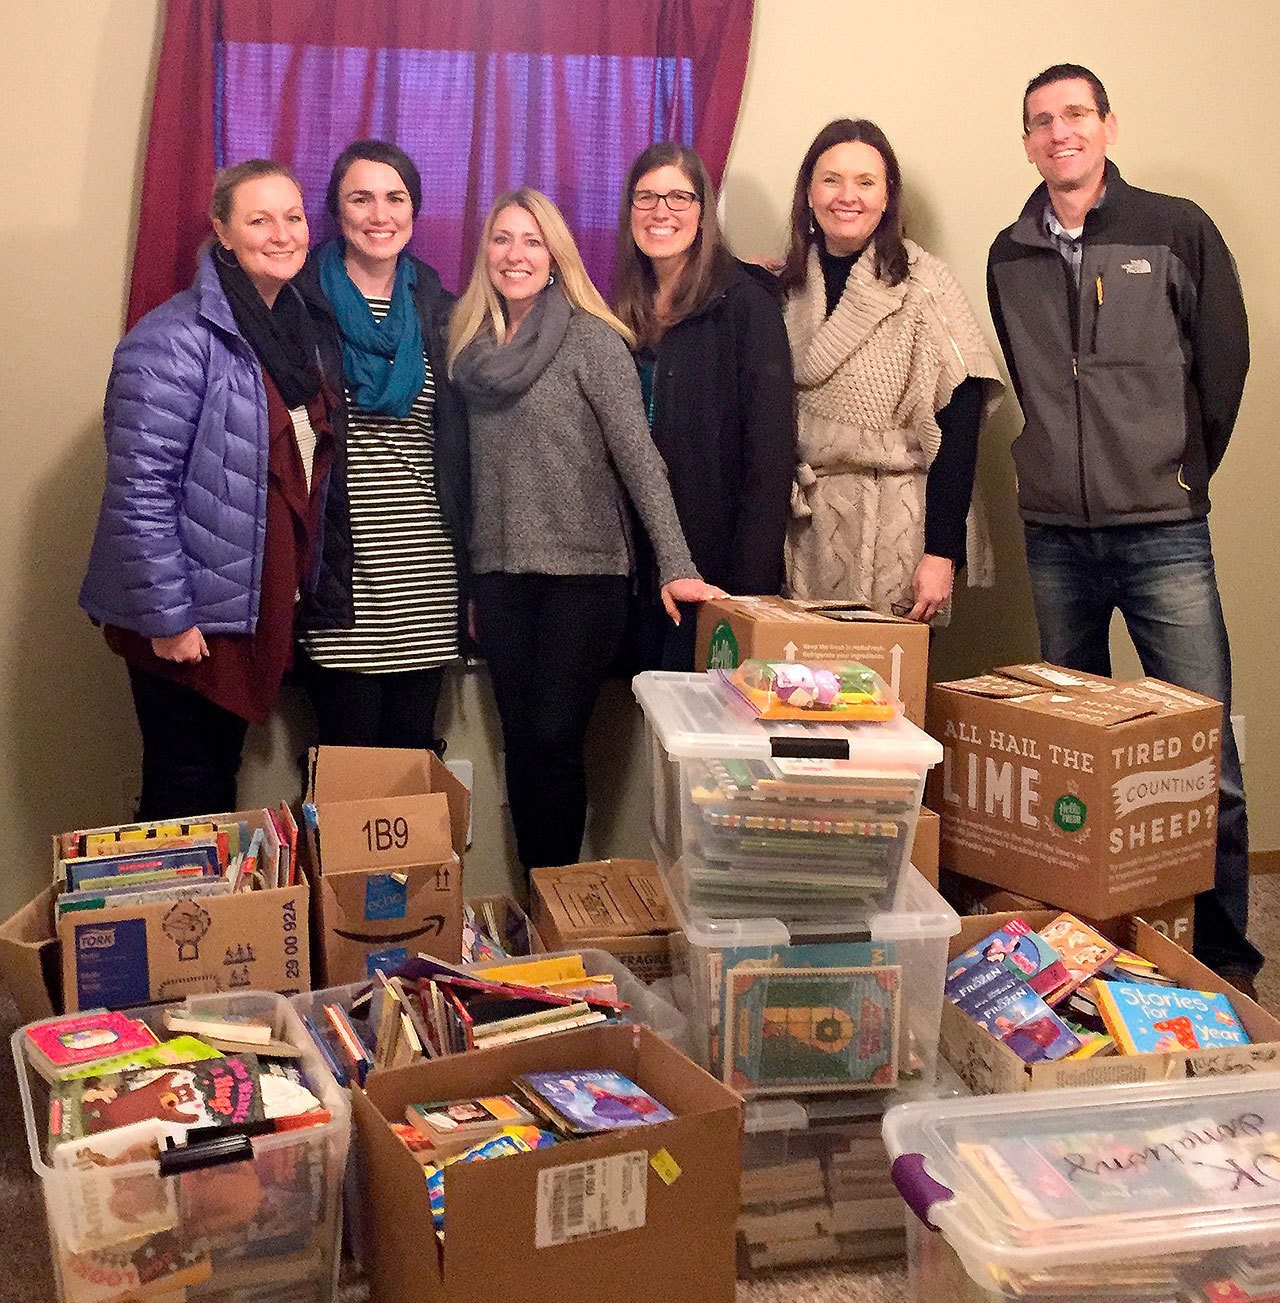 Courtesy Photo                                Participants in the book drive are, from left, Shauna Barison of the Redmond Ridge Goddard School, Erin Knox of the Snohomish Goddard School, Stephanie Doyle, Sara Farrington and Jen Paddock of Acres of Diamonds, and Jeff Barison of the Redmond Goddard School.